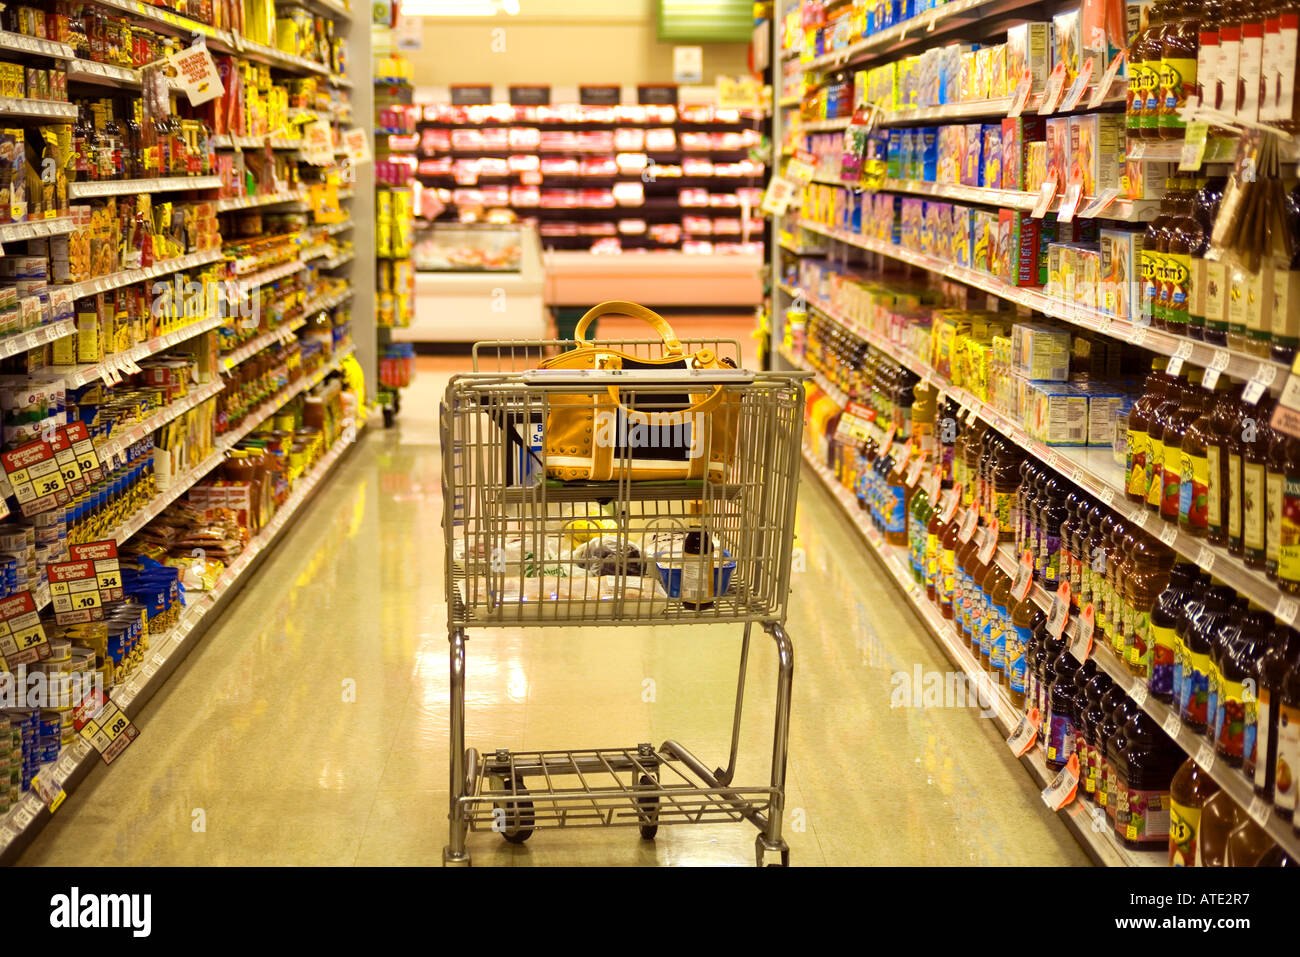 Shopping cart in supermarket Stock Photo